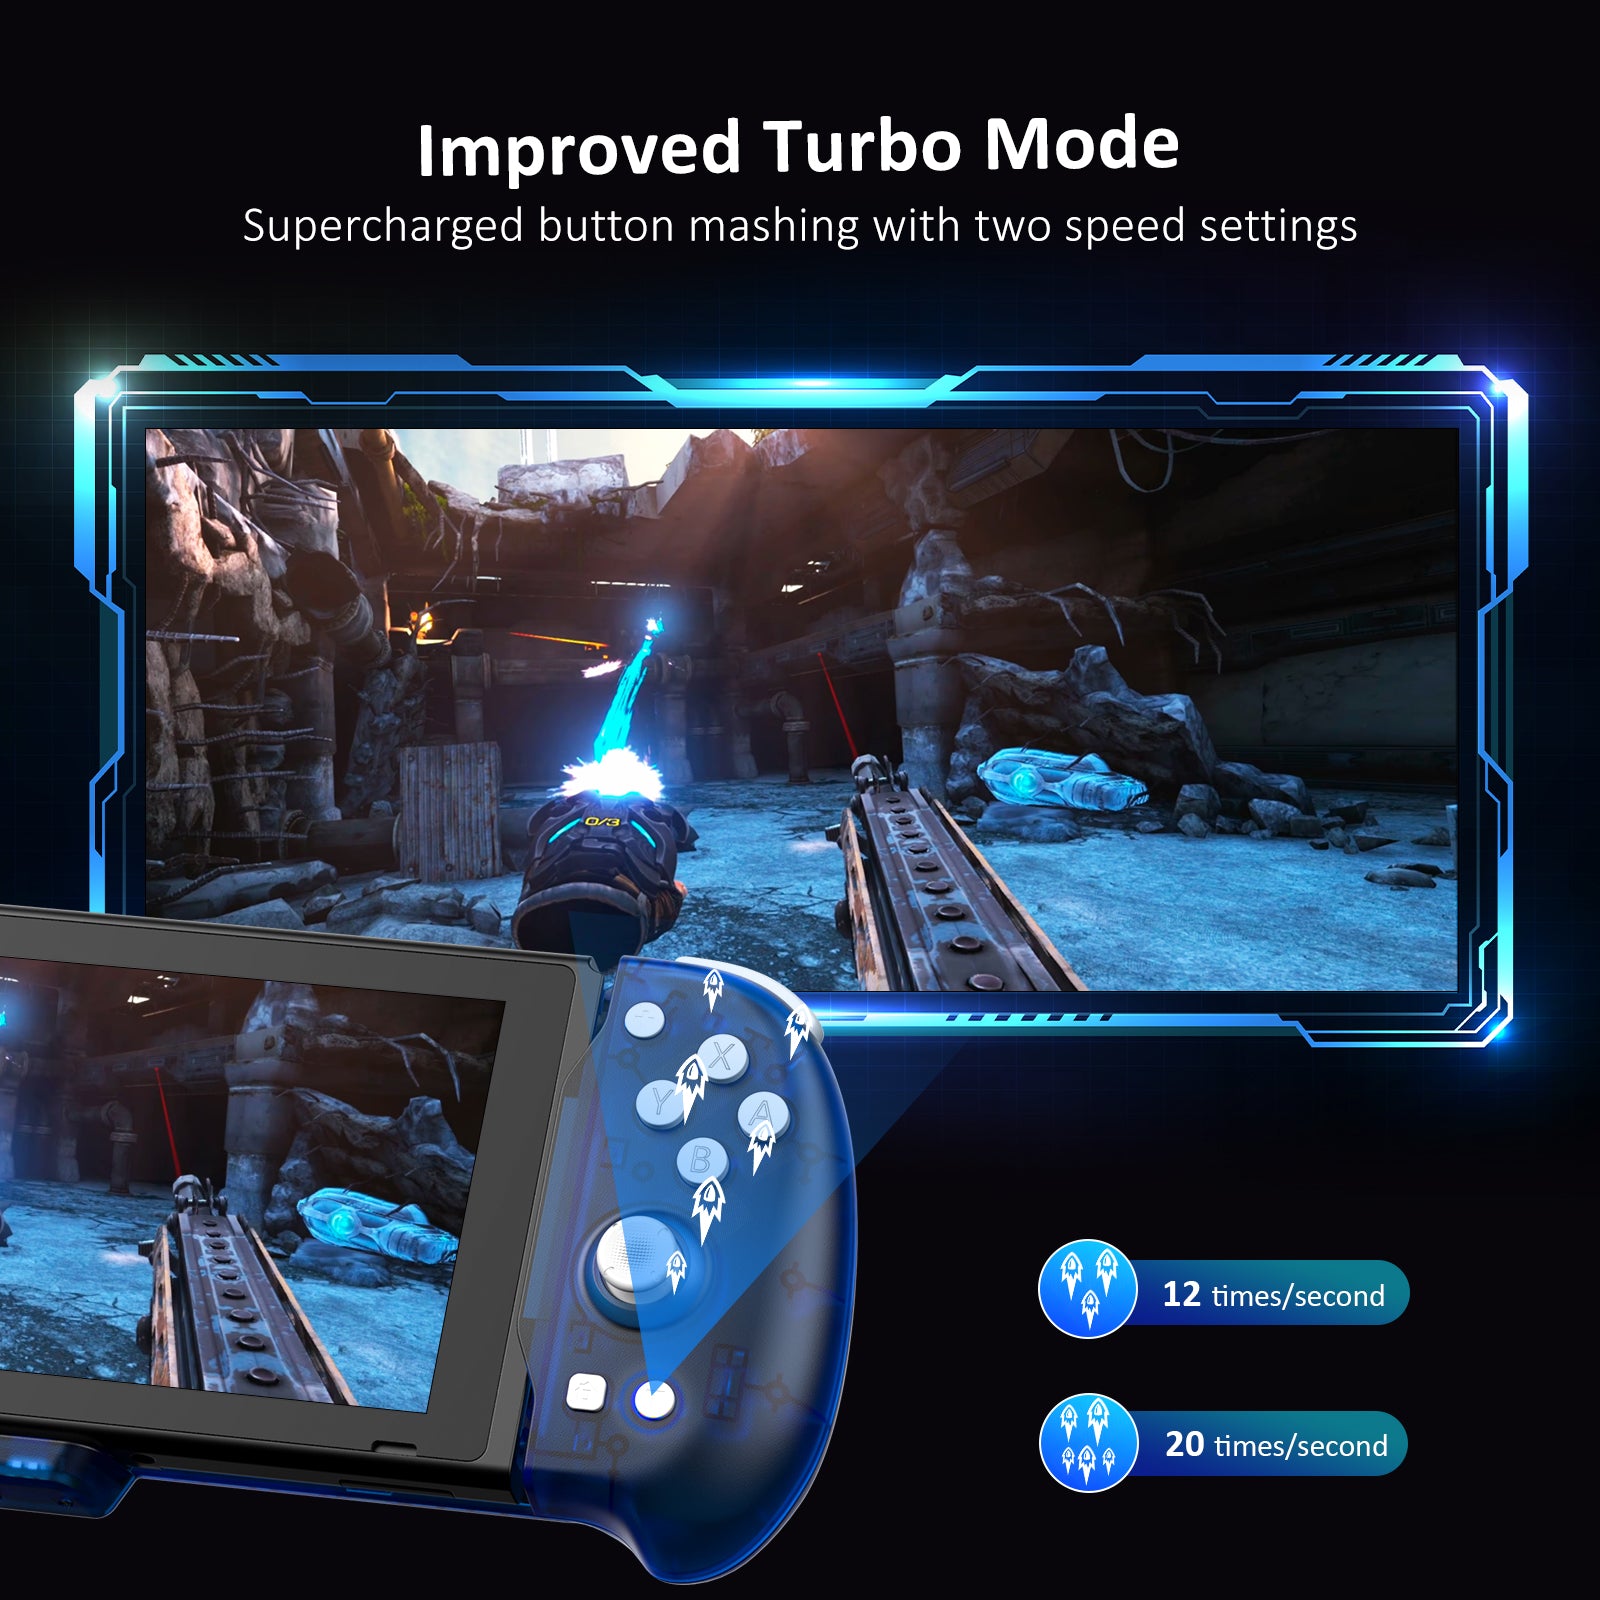 The 2163 controller features turbo function, enhancing gaming experience significantly.